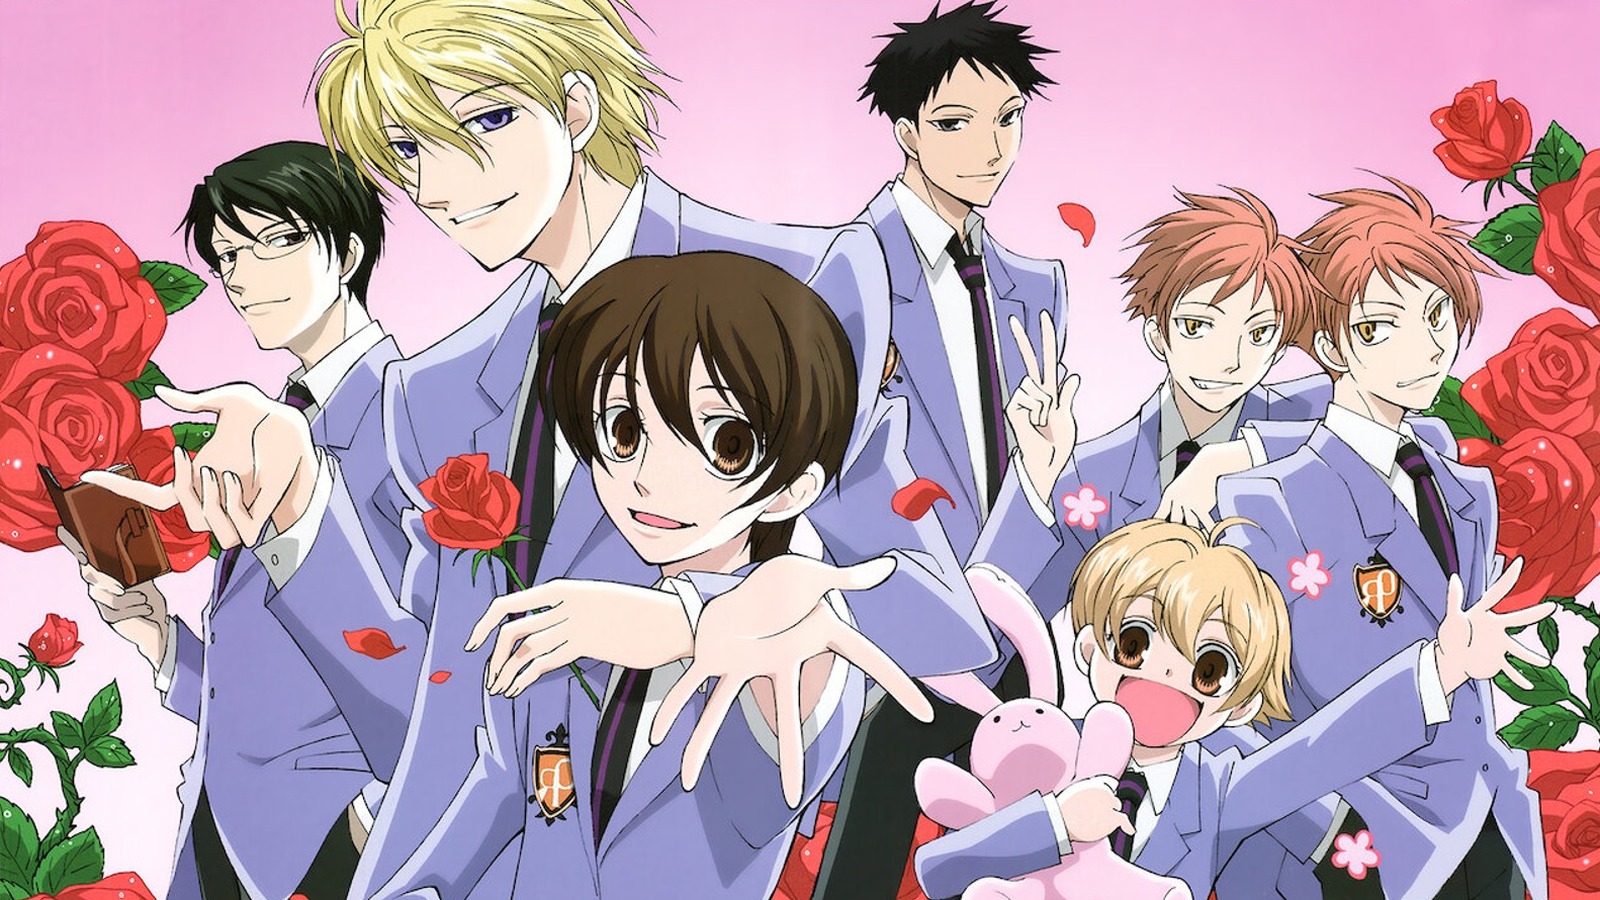 Ouran High School Host Club Season 2 - Everything You Need To Know